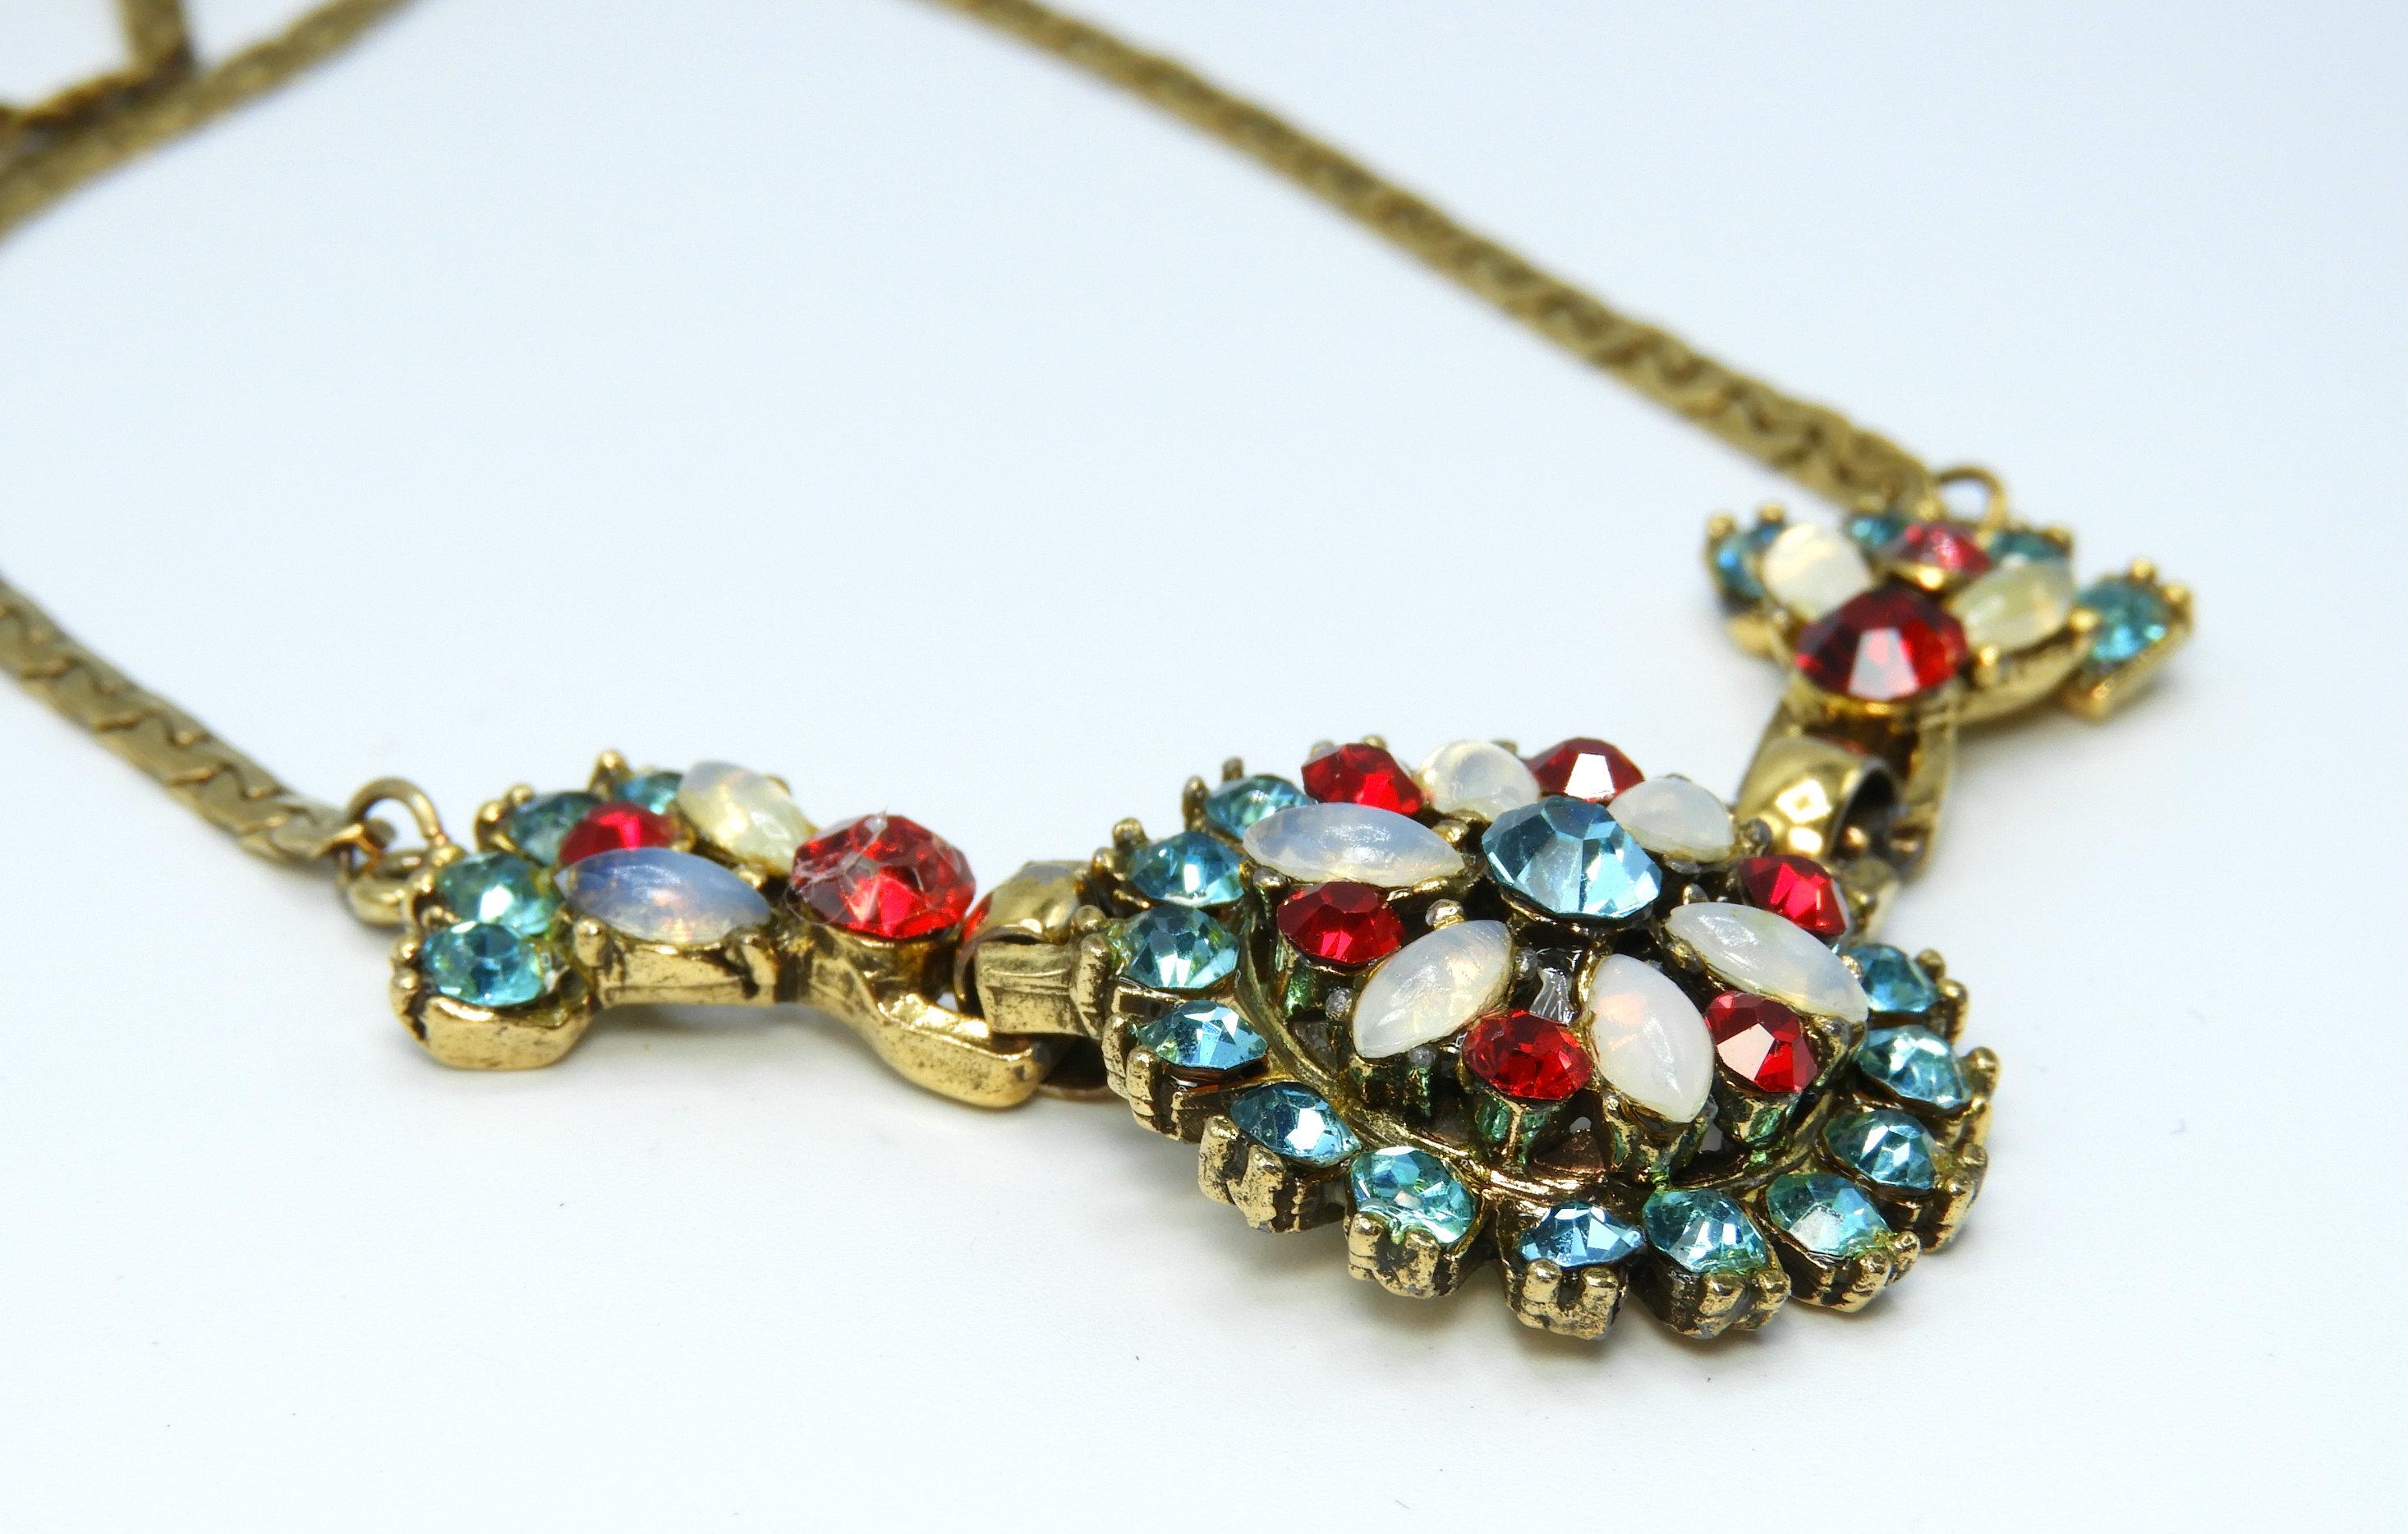 Vintage Aqua, Opaline, and Red Rhinestone Necklace and Earrings Set